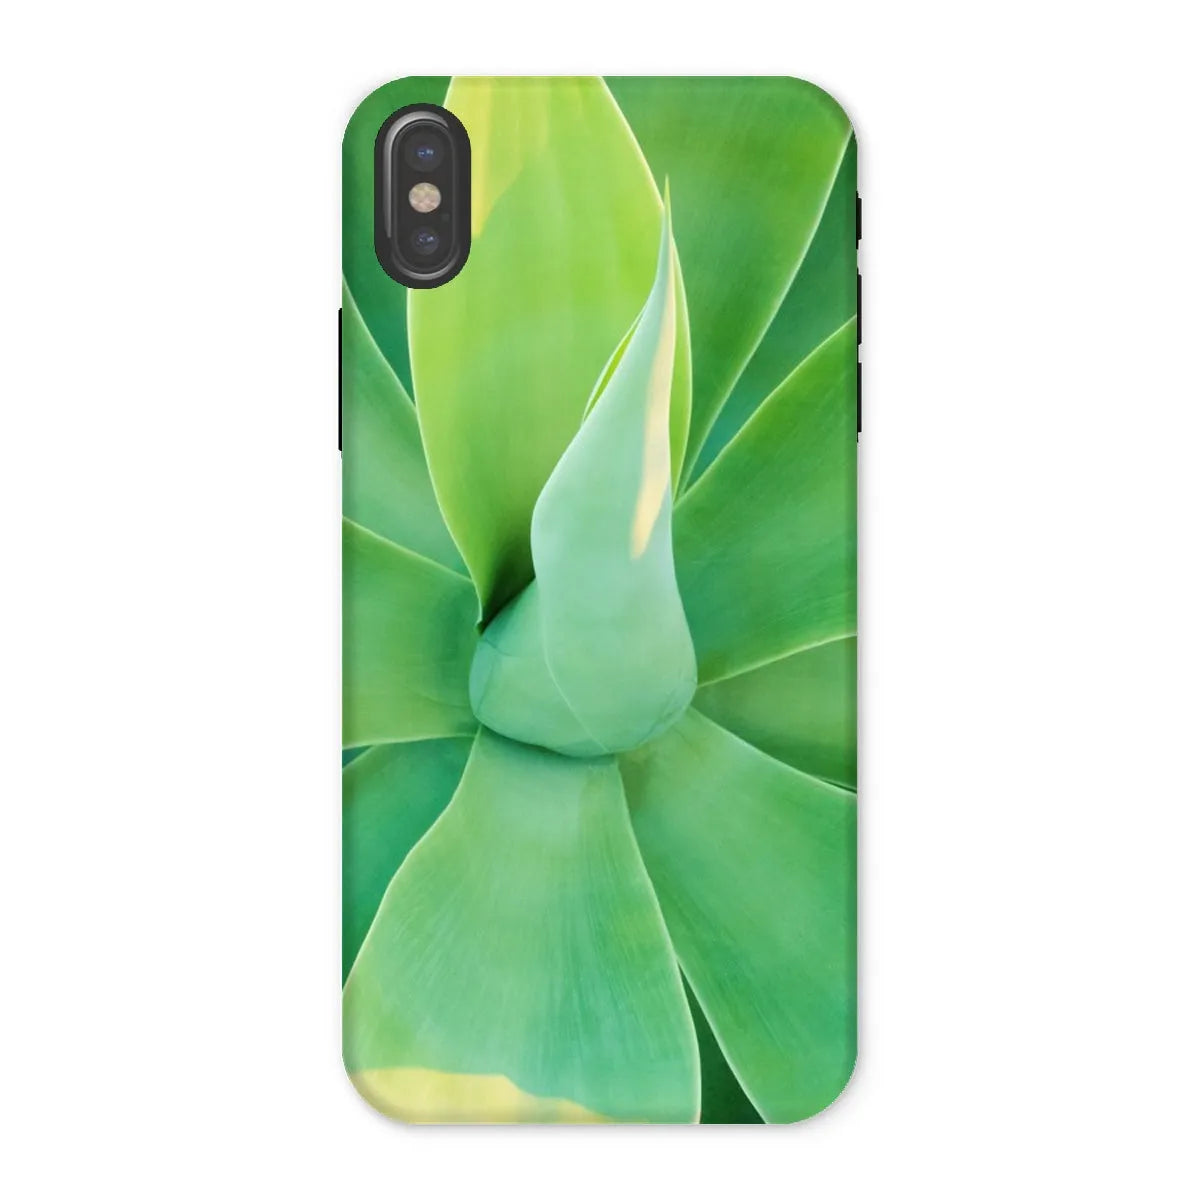 In Bloom Too Tough Phone Case - Iphone x / Matte - Mobile Phone Cases - Aesthetic Art